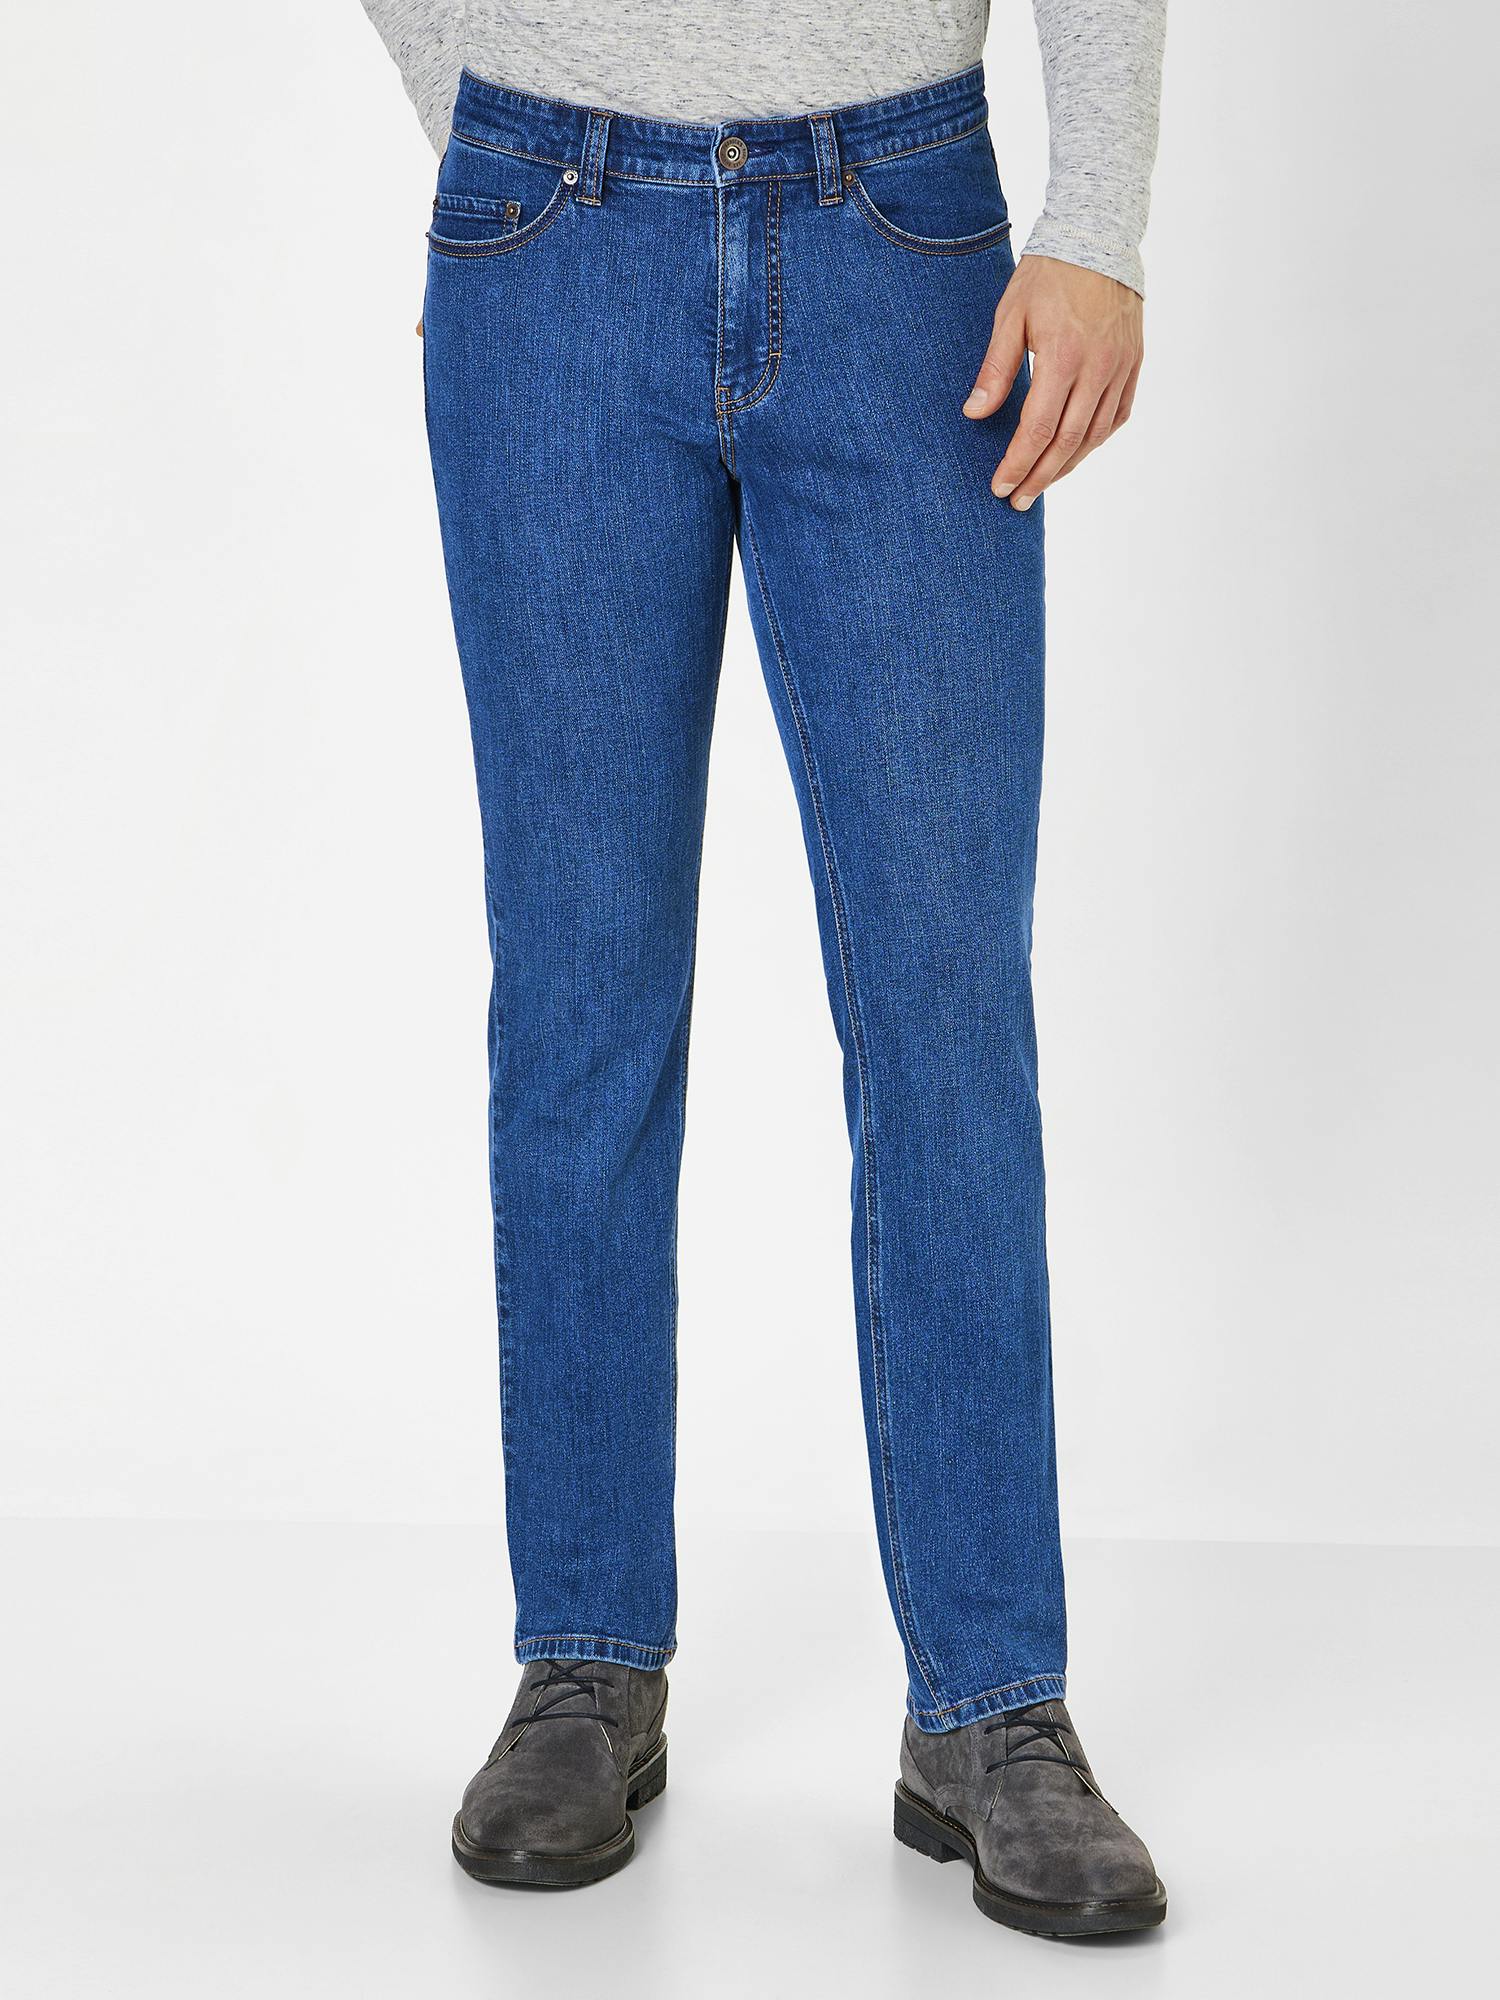 Paddock's Pipe Jeans Slim Fit deep blue moustache use